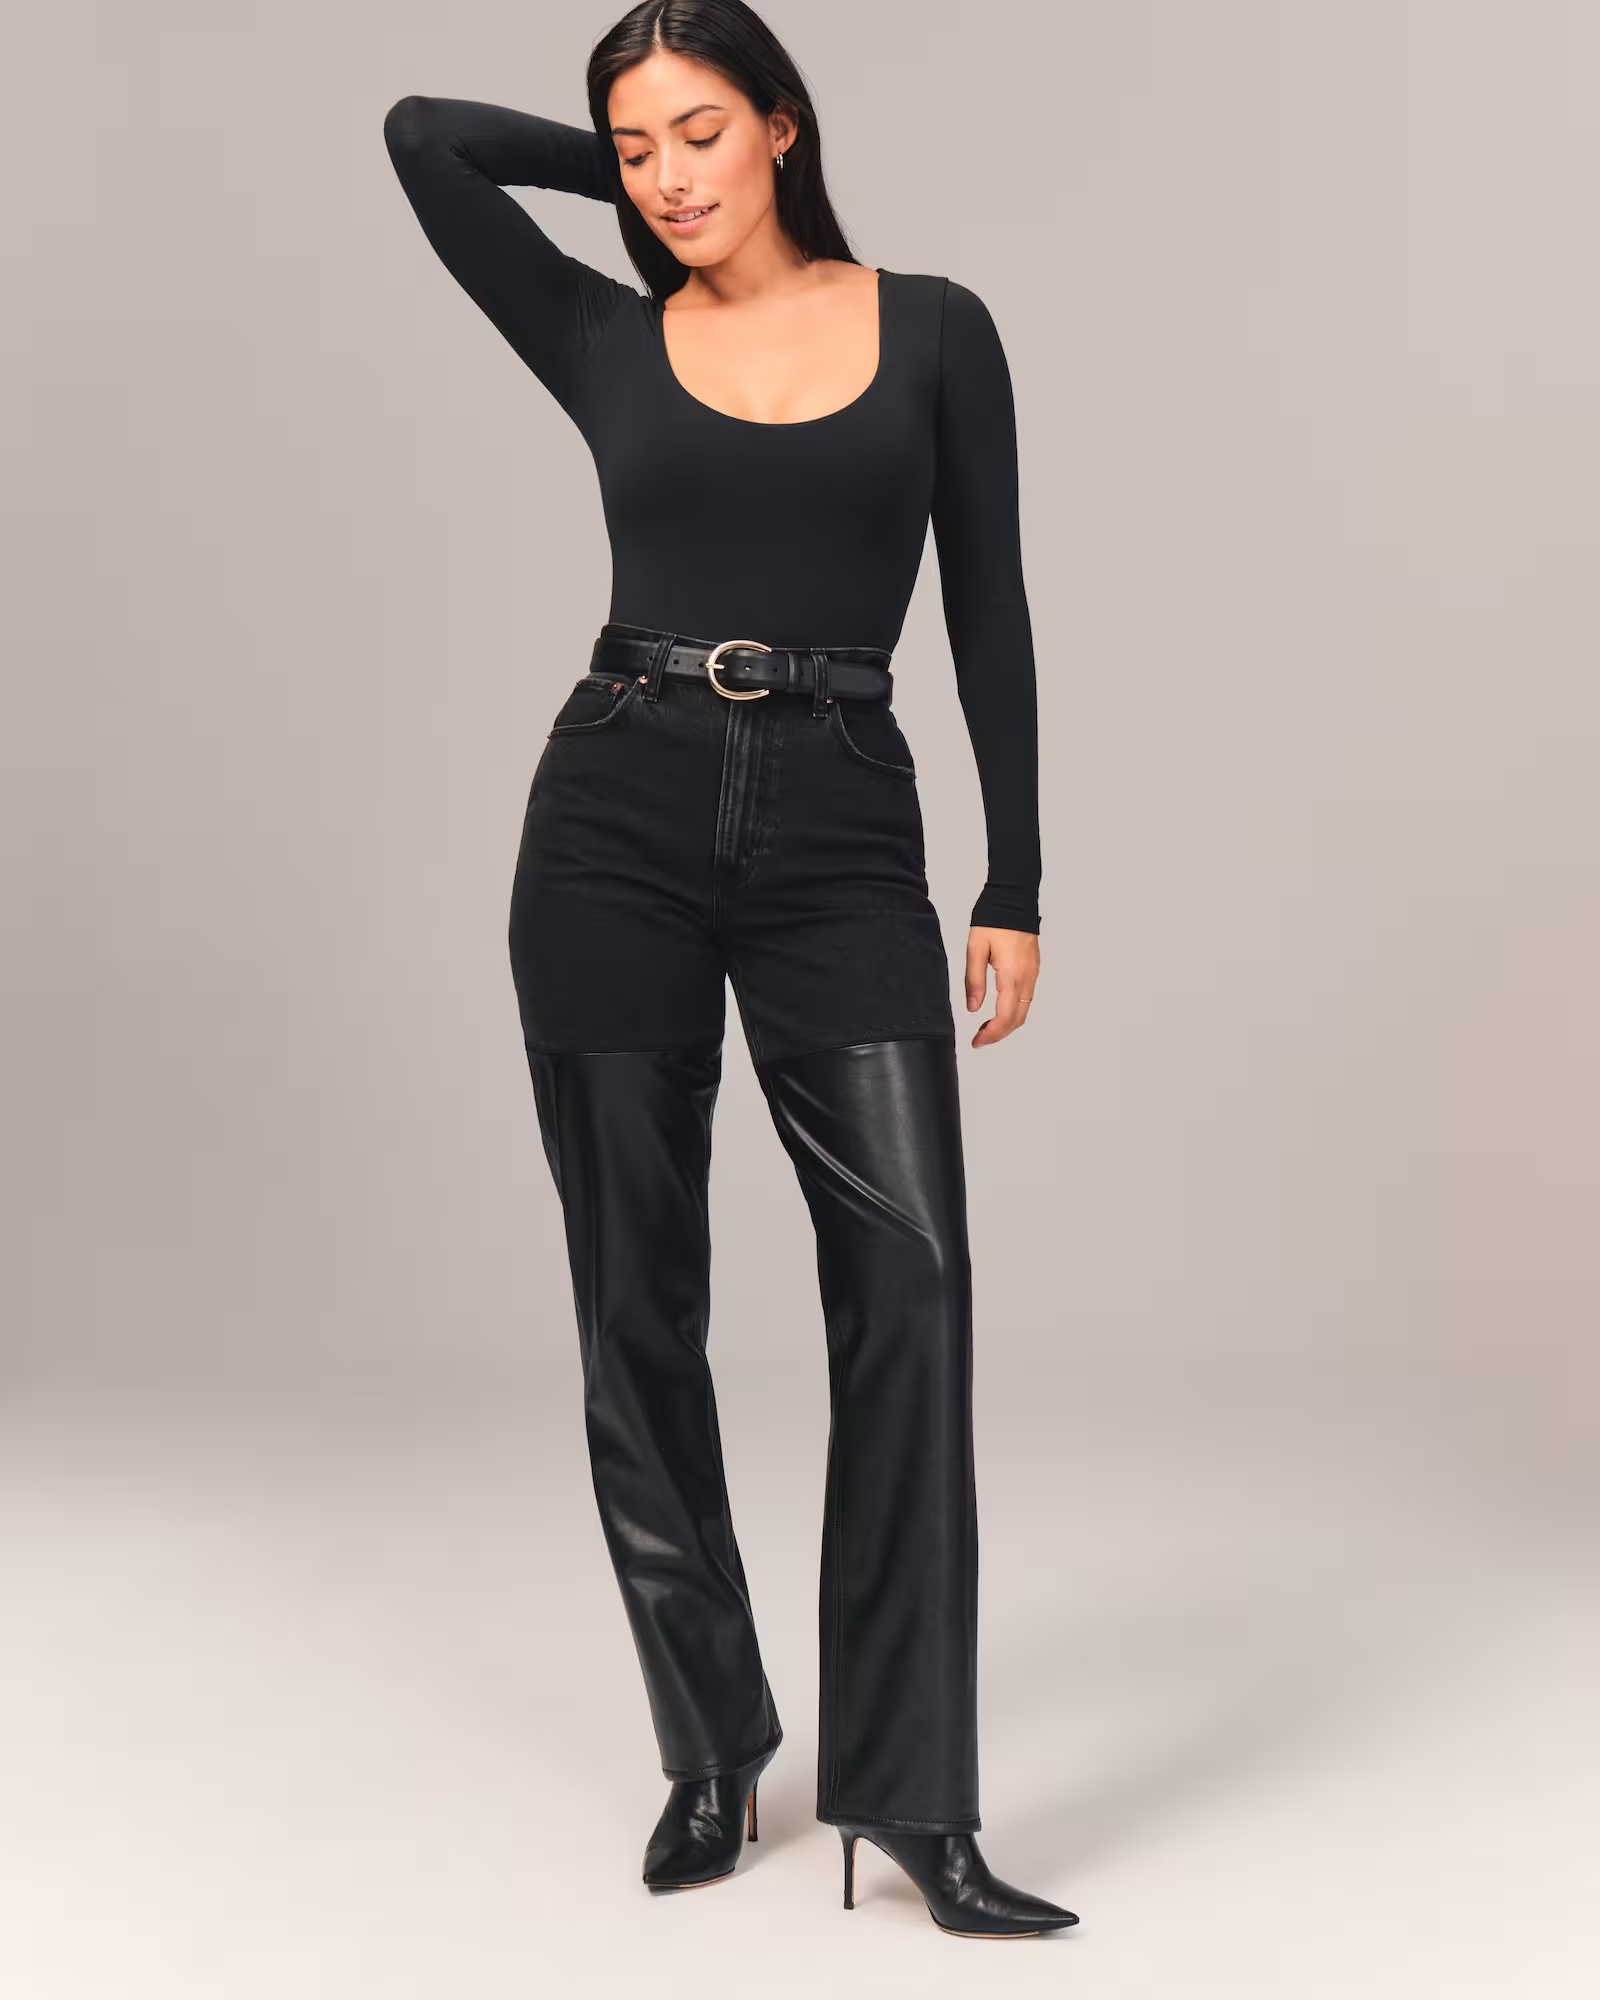 Abercrombie's Curve Love jeans review: High rise, 90s, more